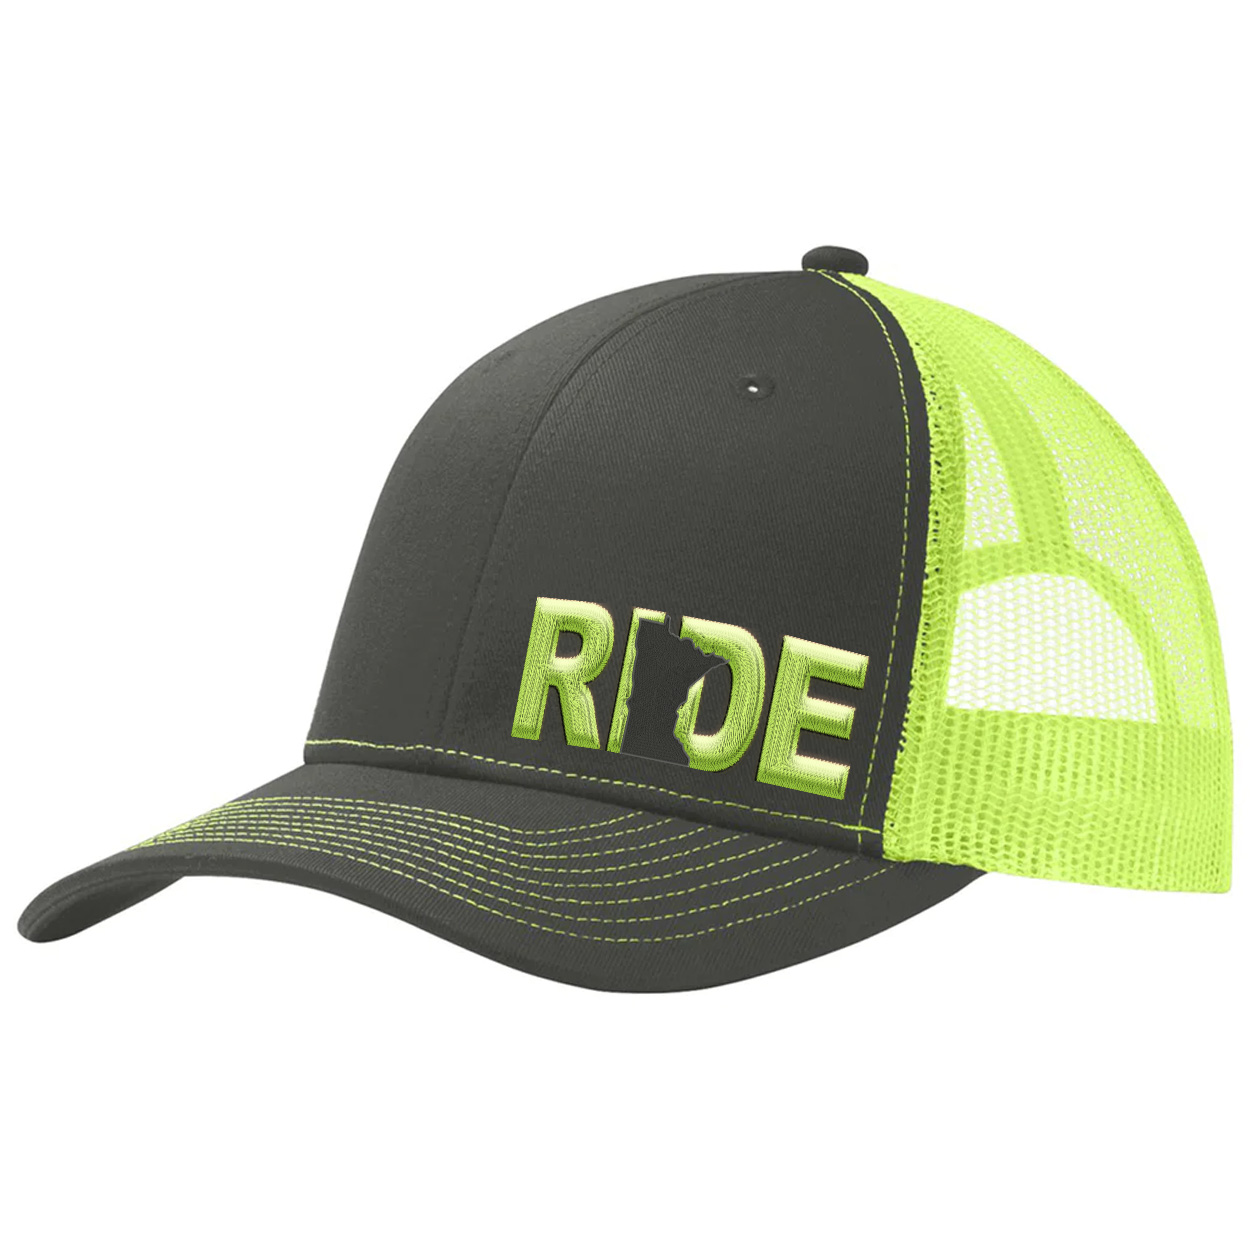 Ride Minnesota Night Out Pro Embroidered Snapback Trucker Hat Gray/Neon Yellow